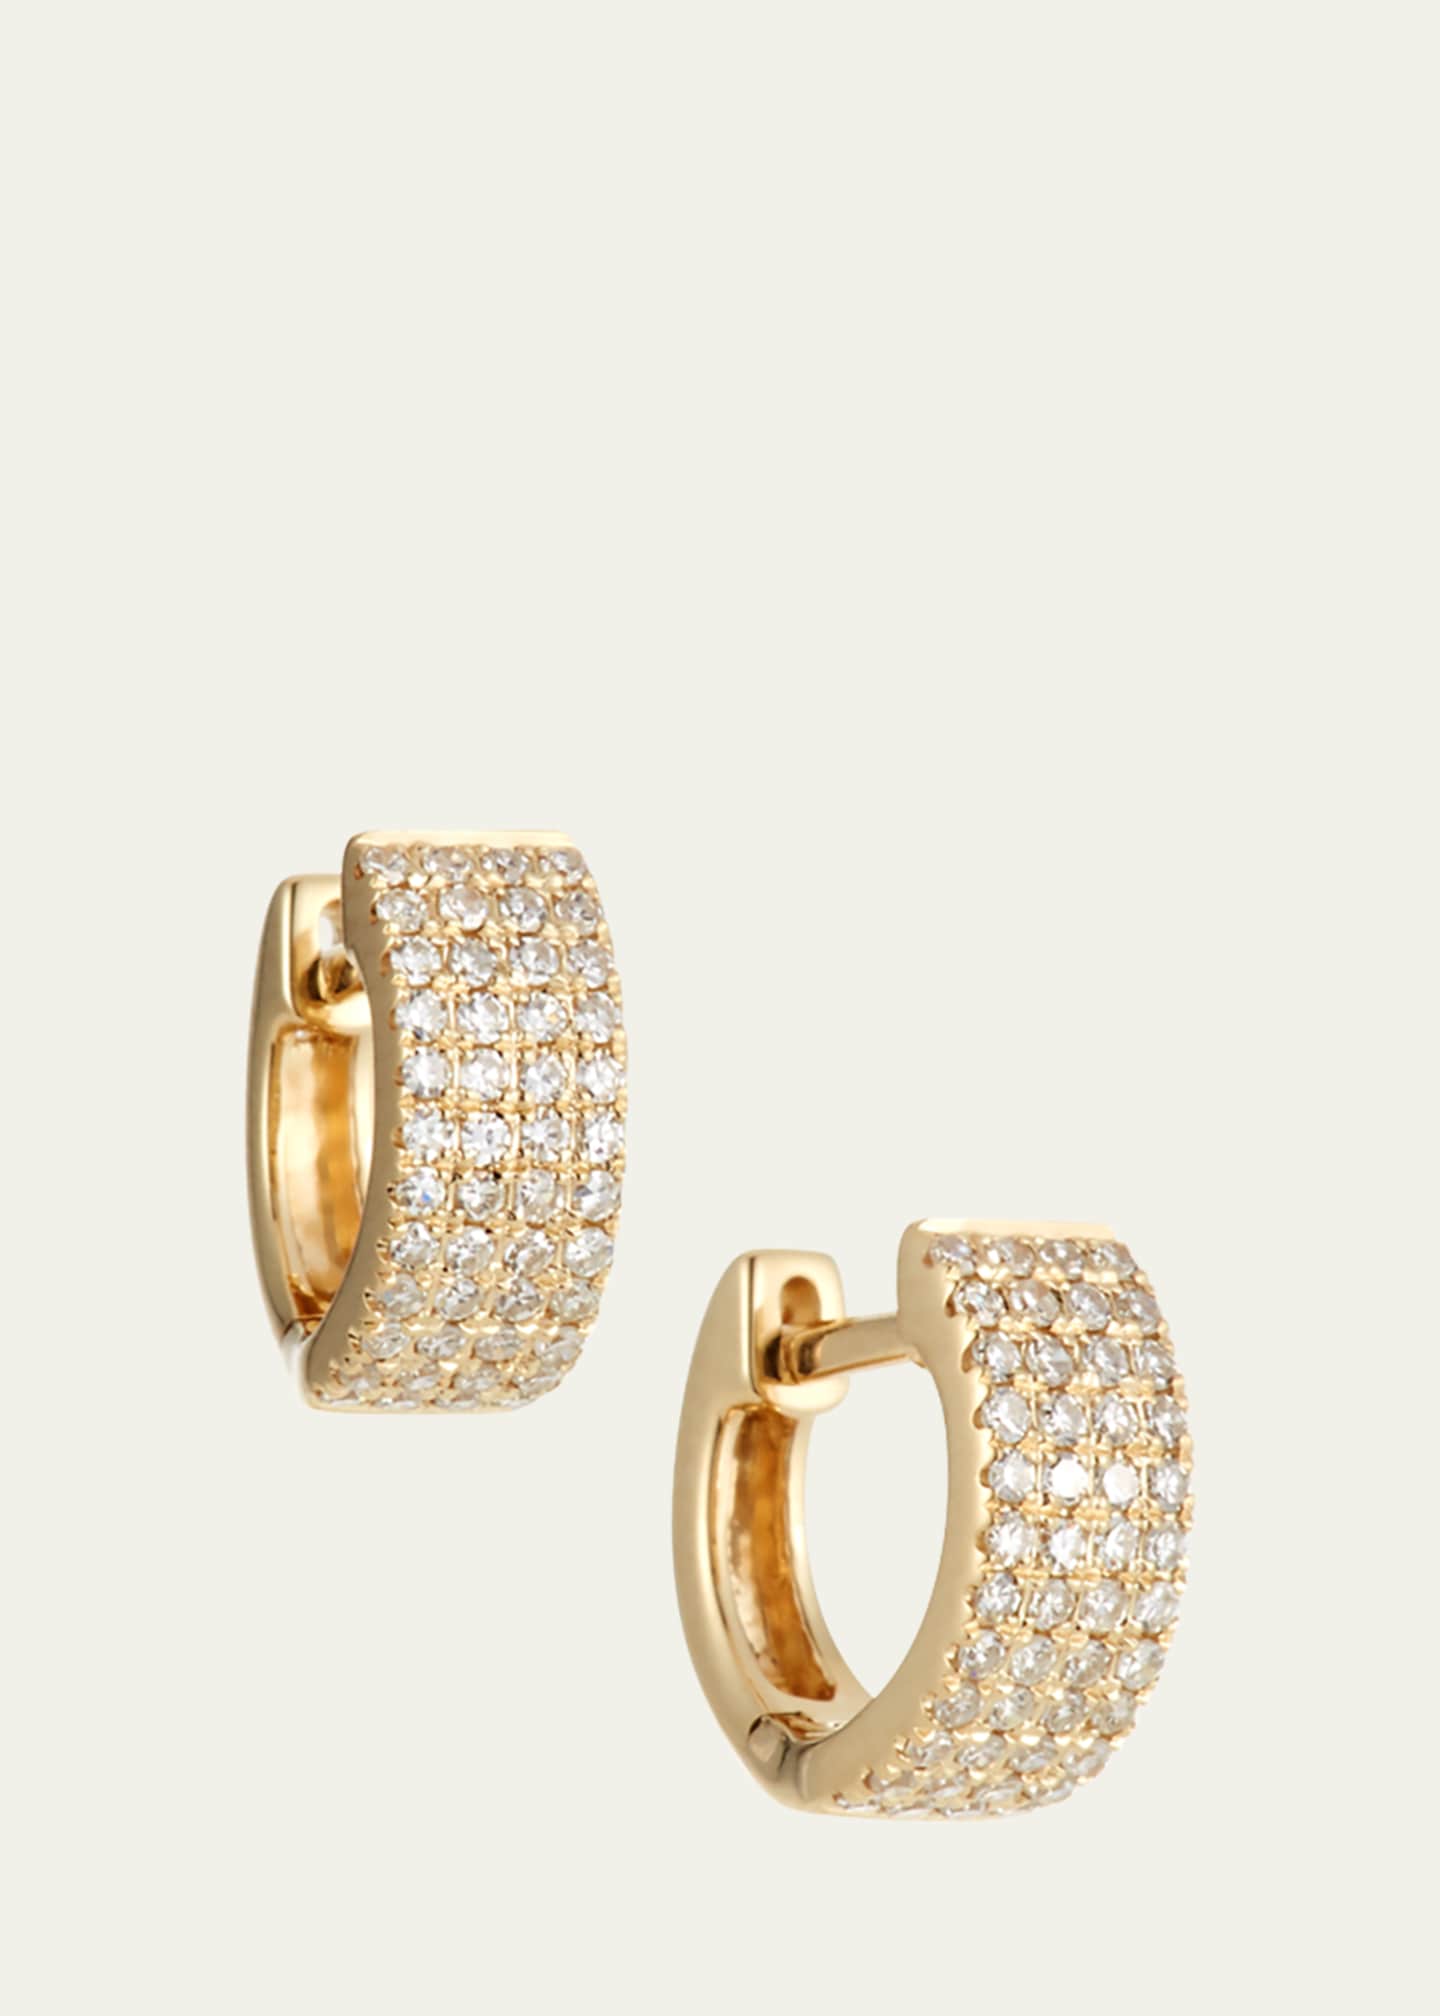 Ef Collection 14kt yellow gold huggie earring